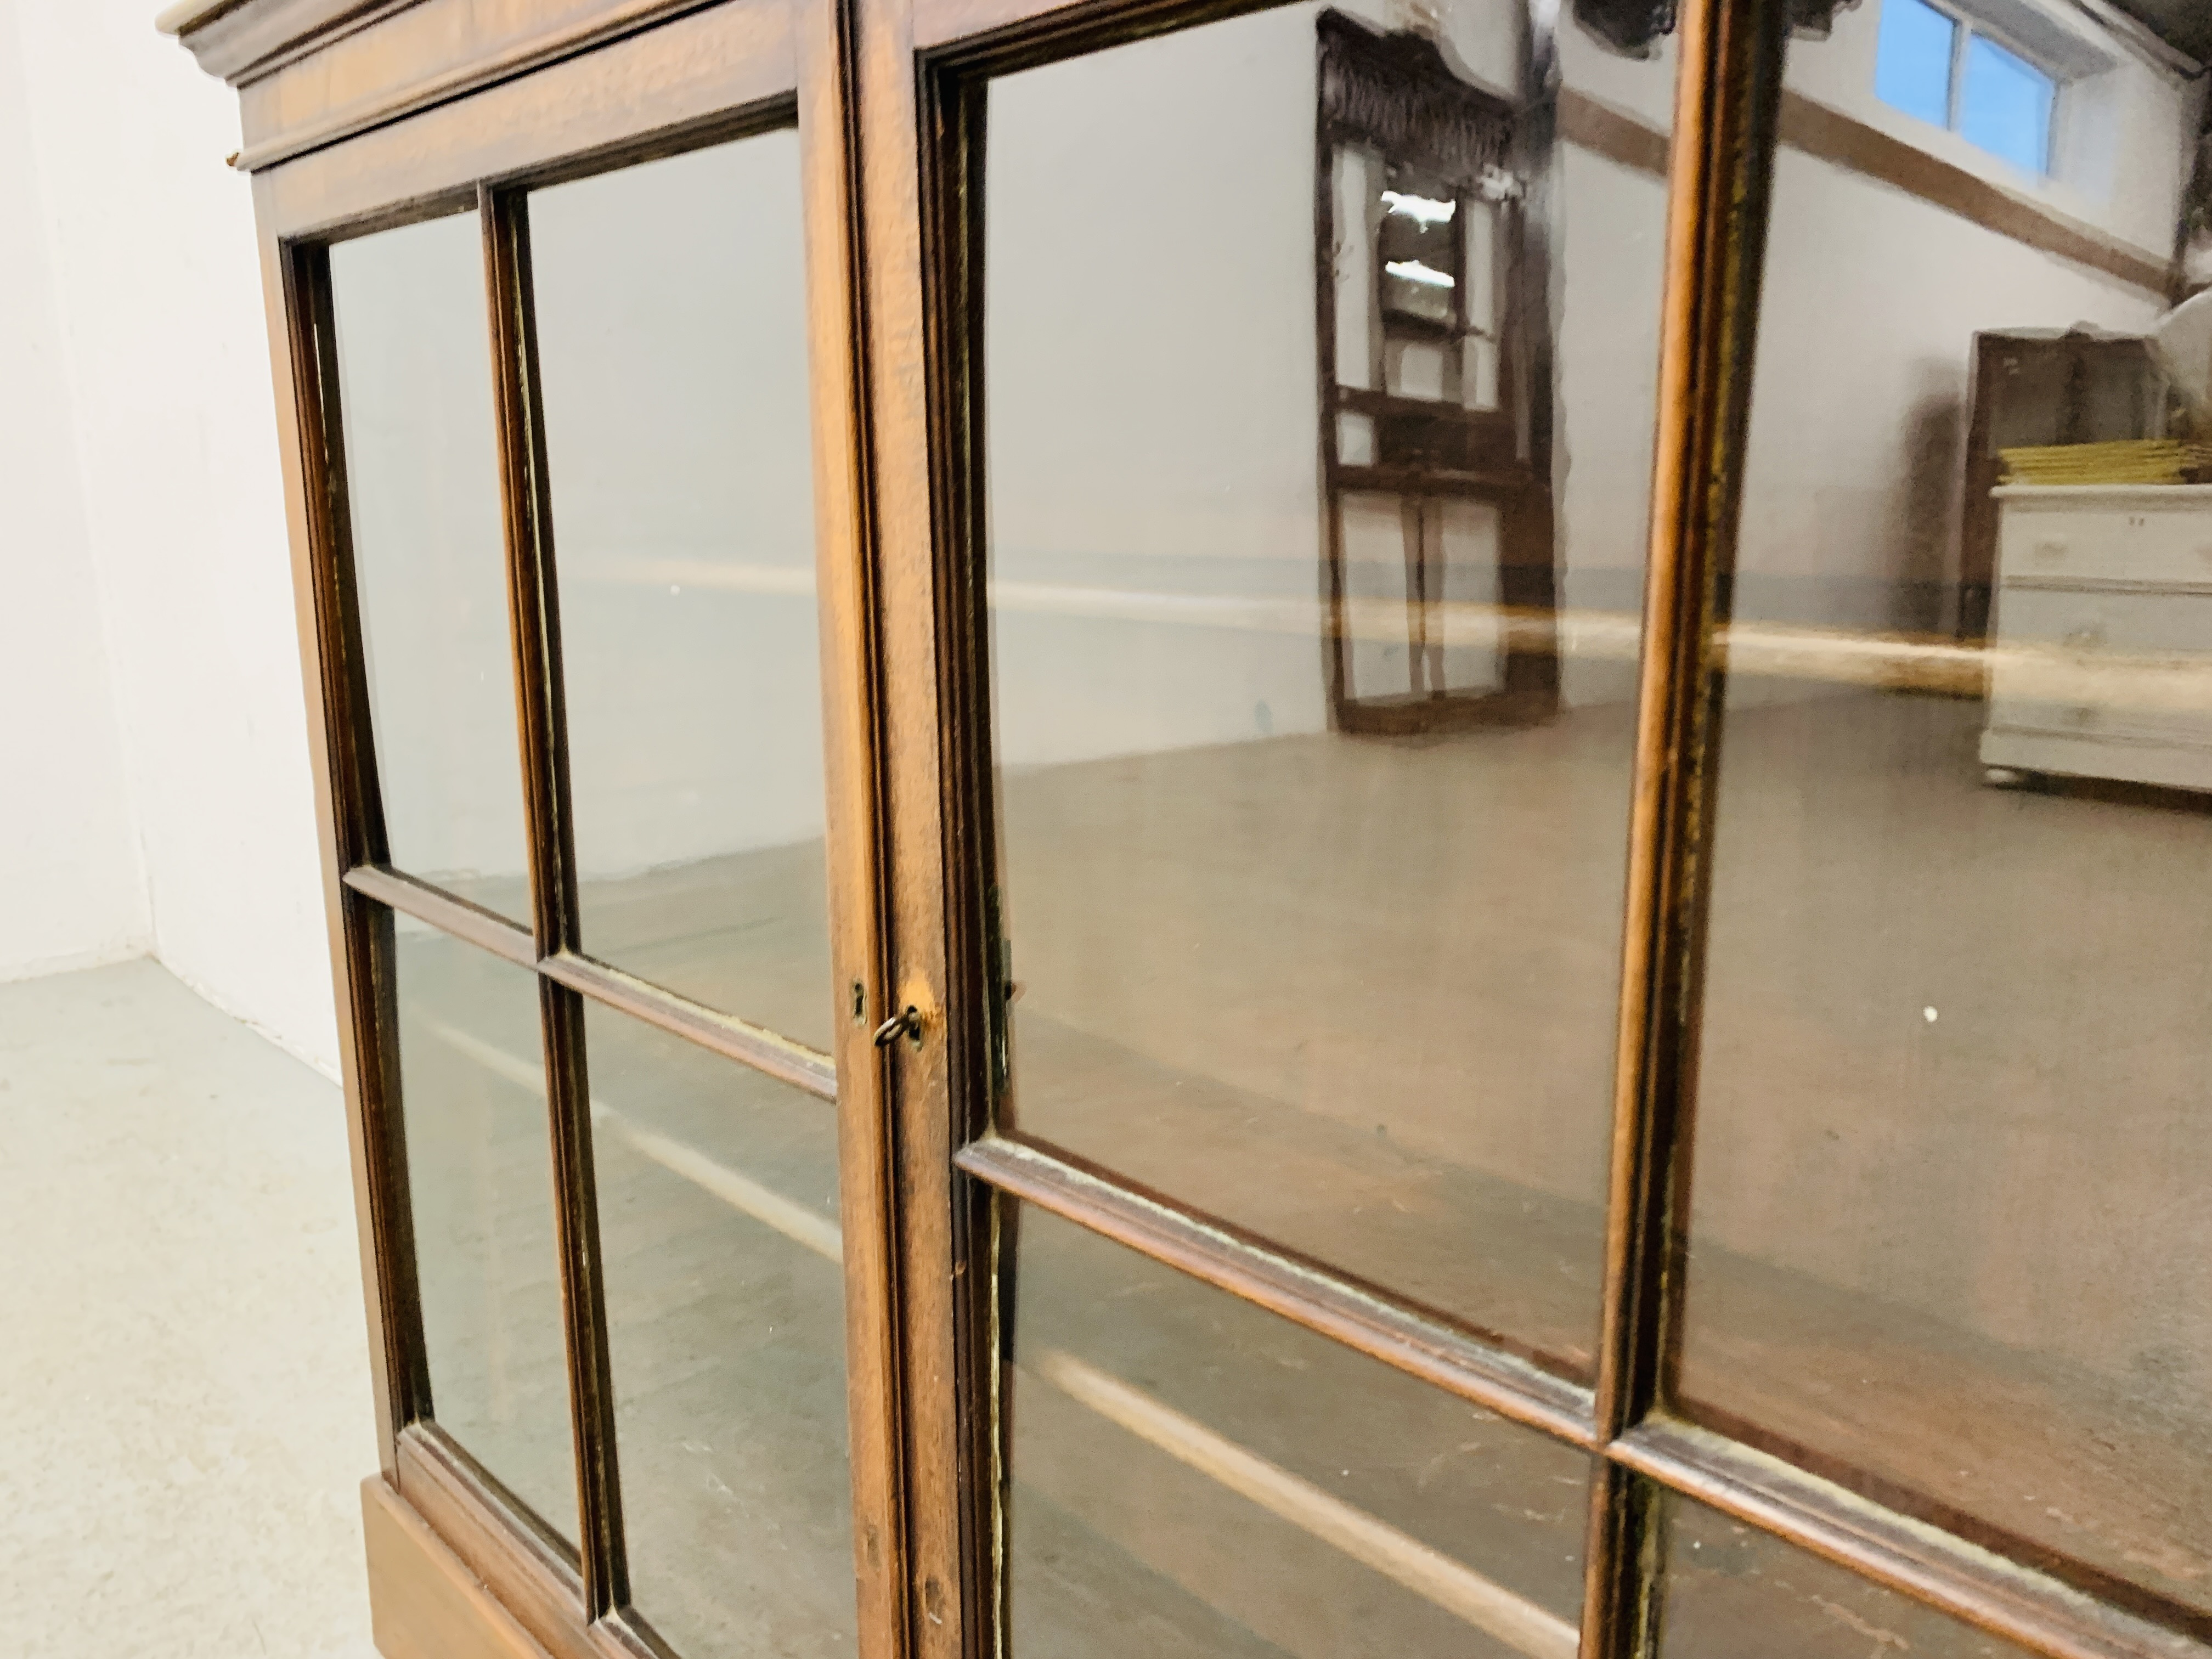 A MAHOGANY TWO DOOR GLAZED DISPLAY CABINET, BEING A TOP HALF OF A BOOKCASE, NOW CONVERTED - W 100CM. - Image 7 of 8